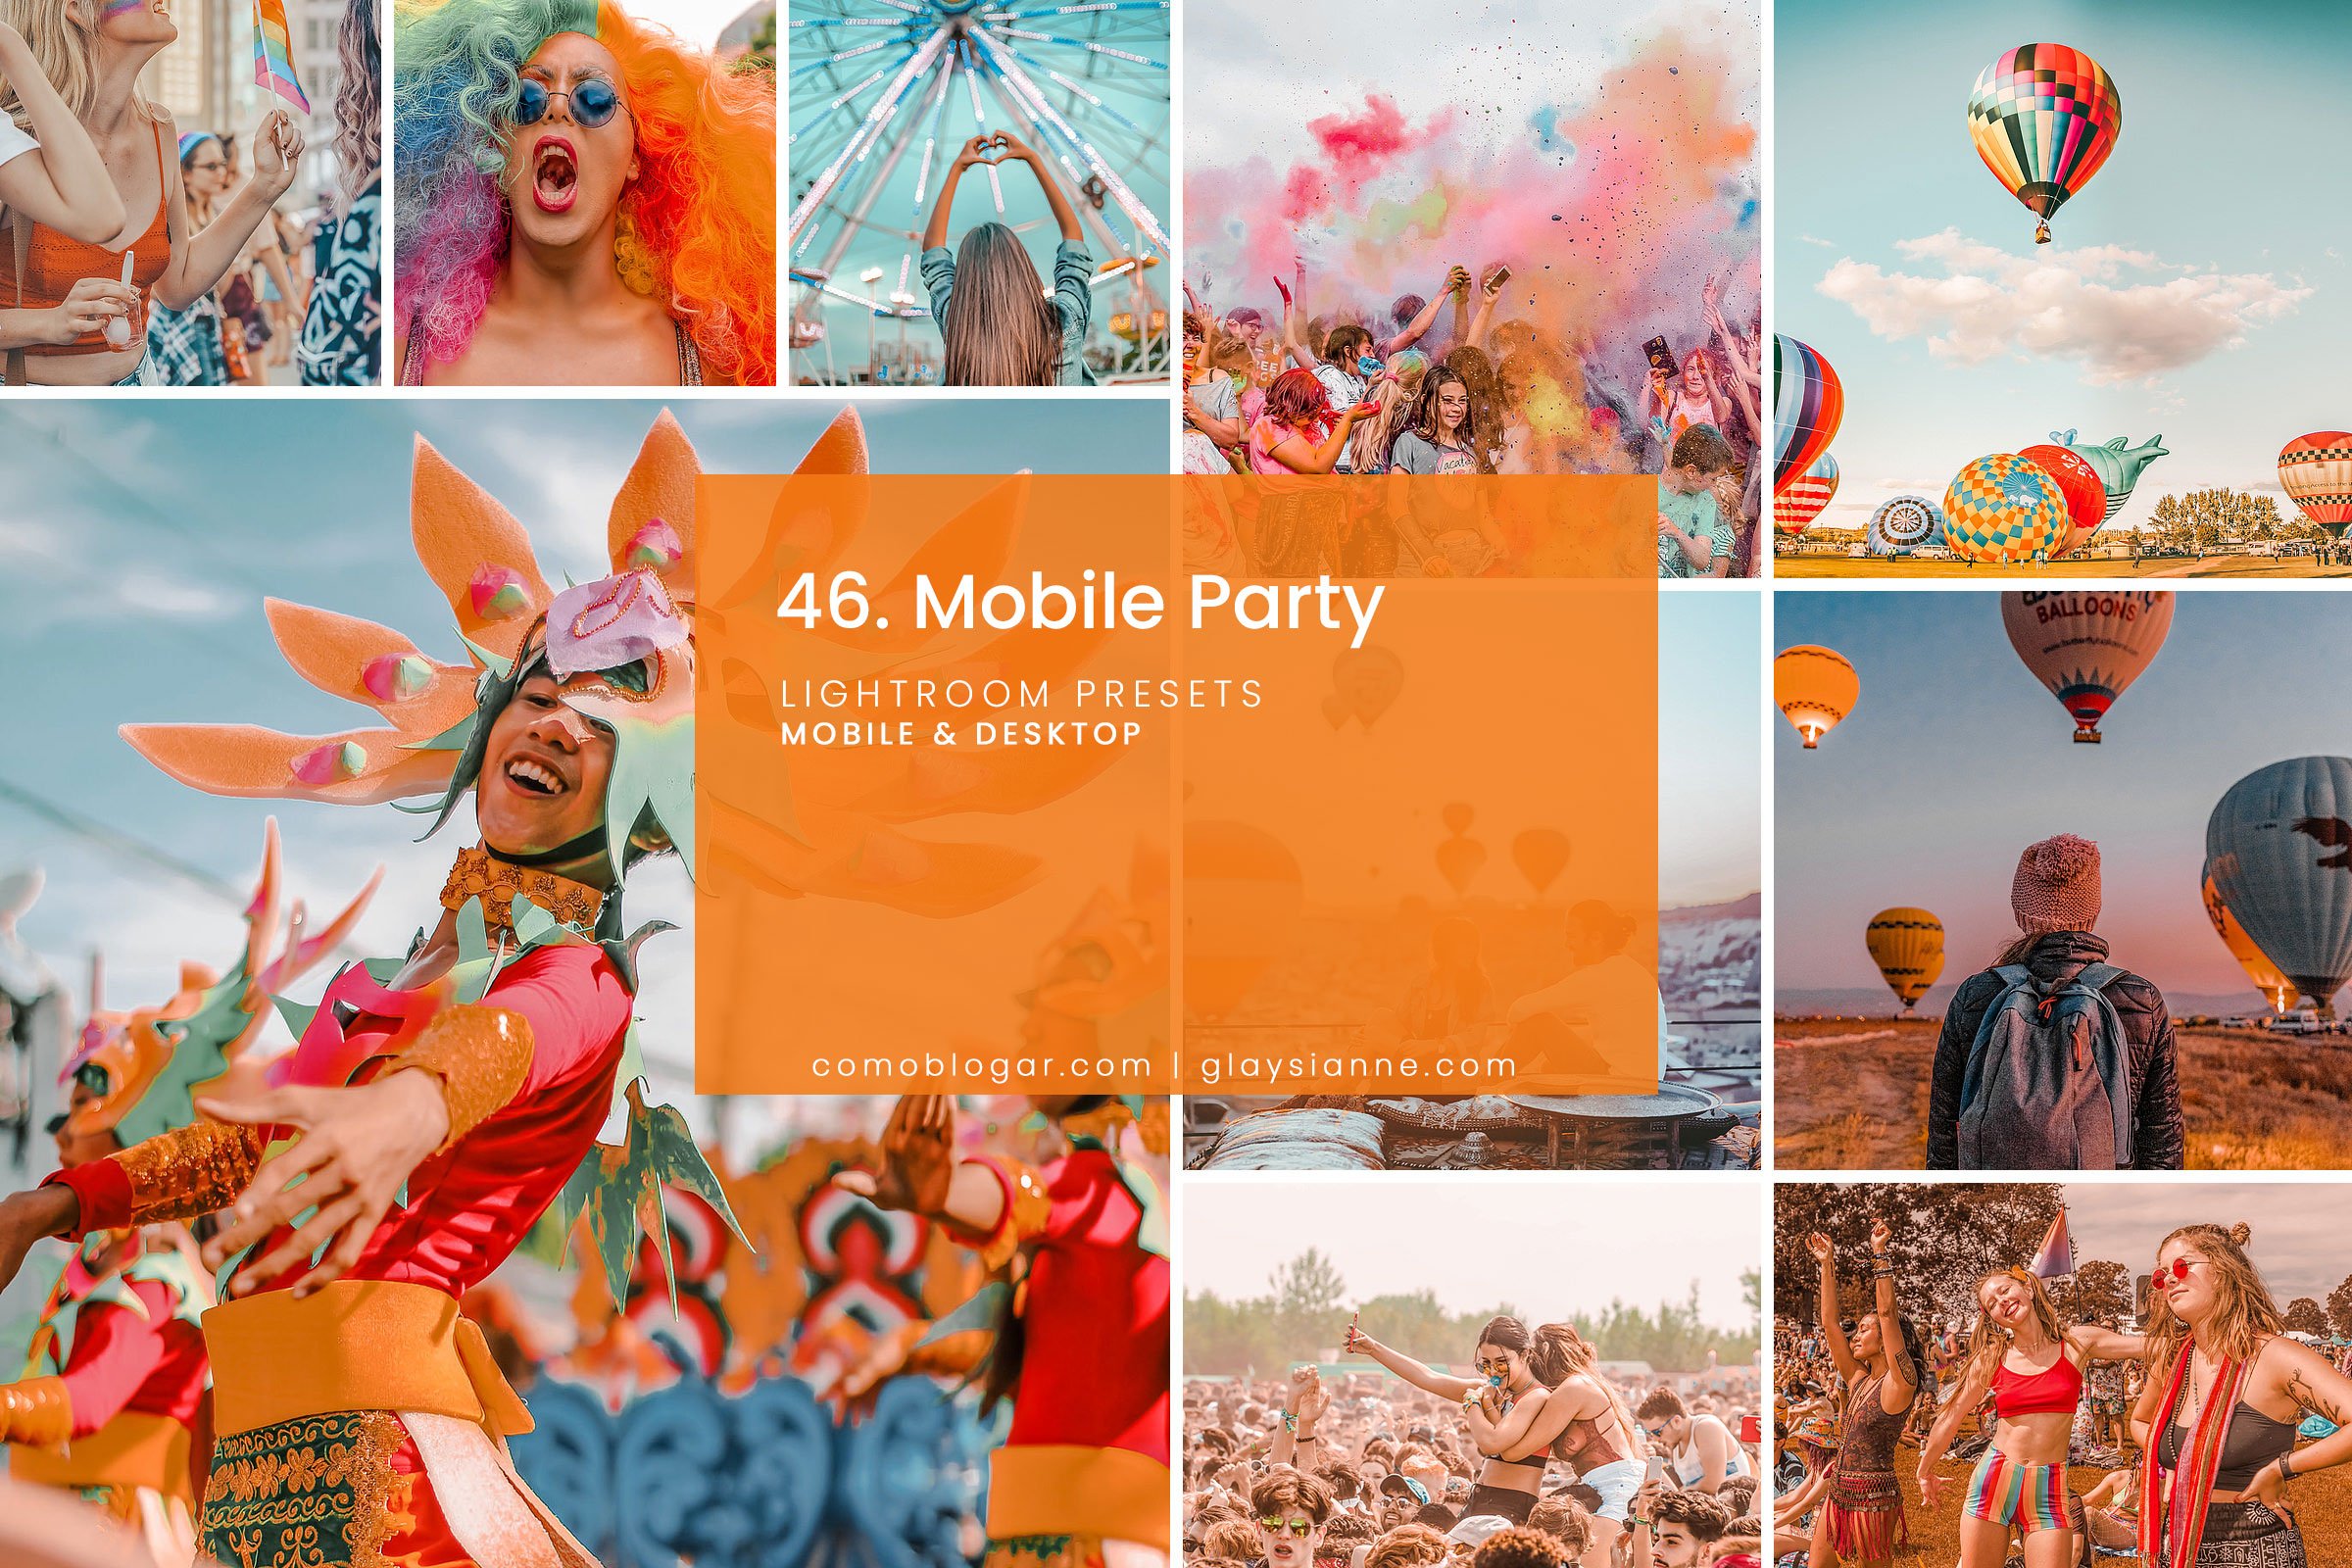 46. Mobile Partycover image.